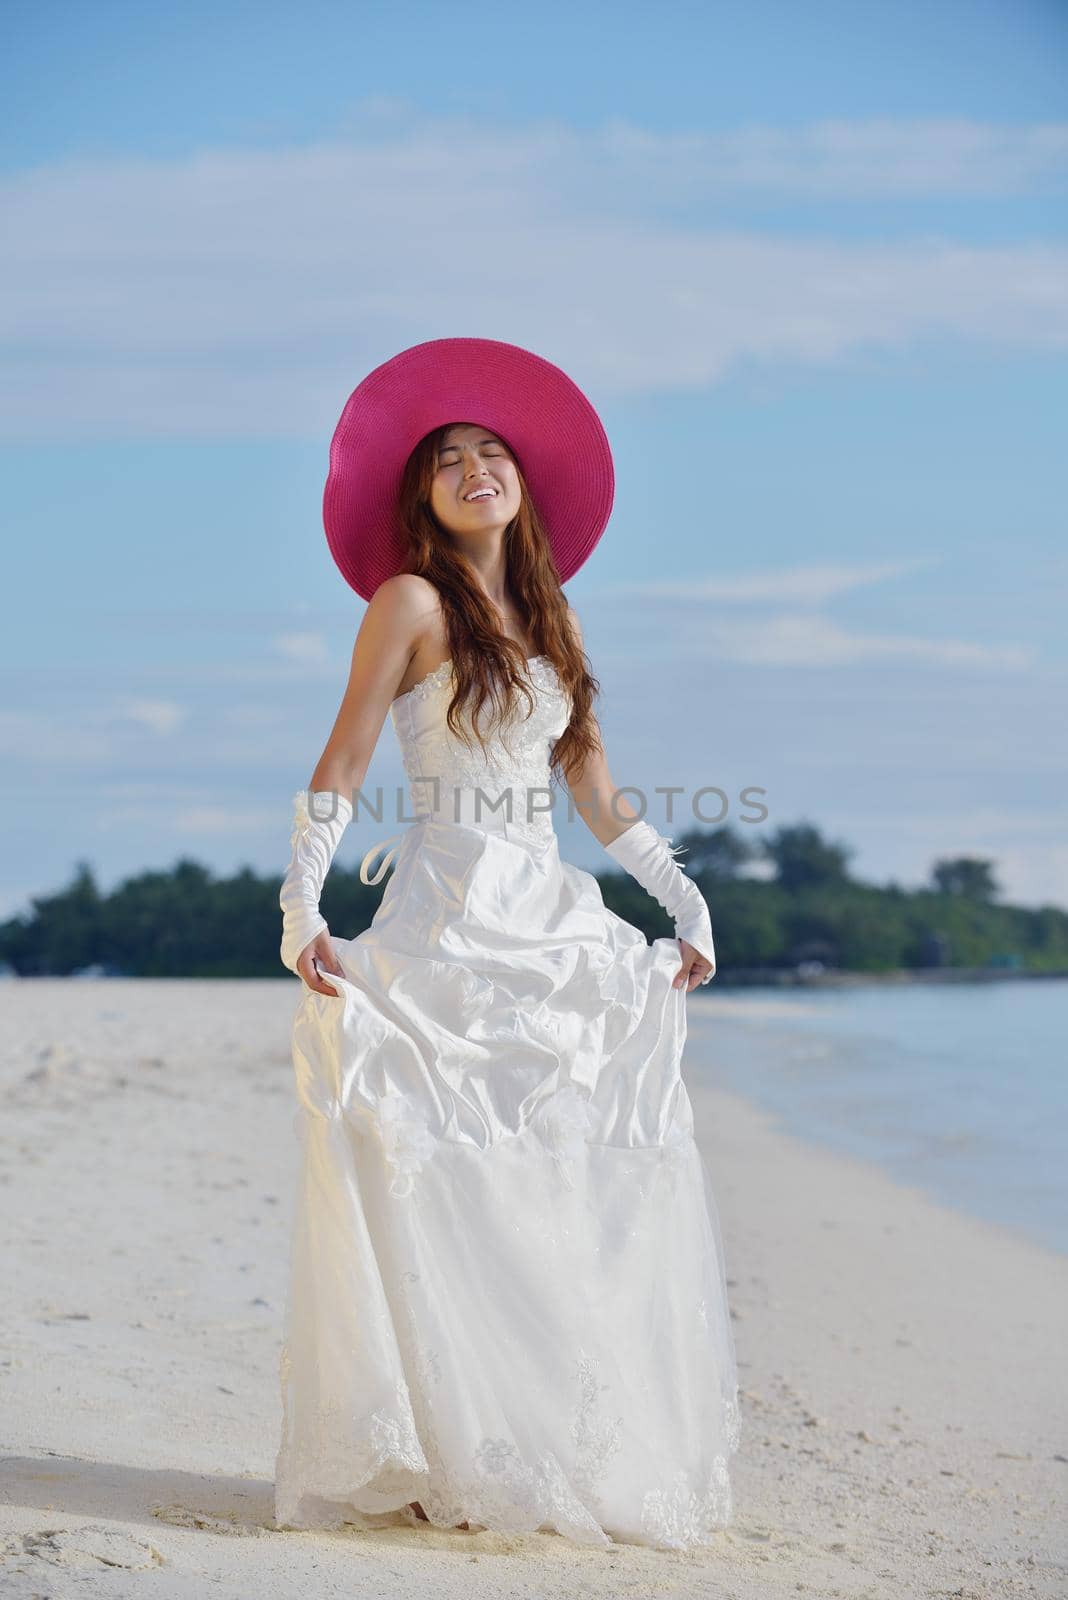 asian  bride with a veil on the beach in the sky and blue sea. honeymoon on the fantastic island at summer